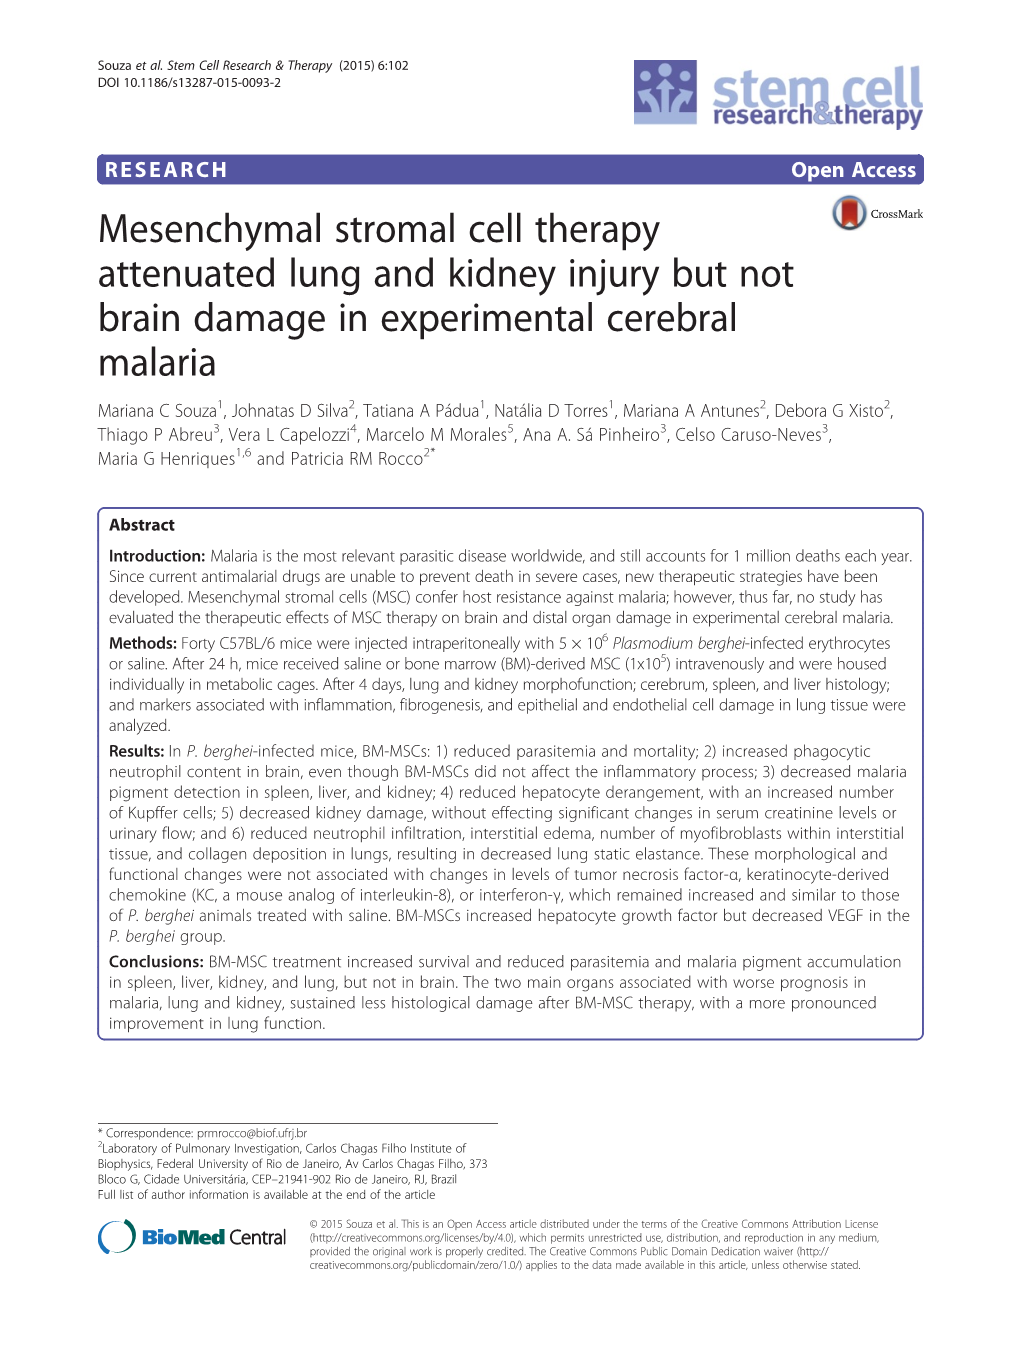 Mesenchymal Stromal Cell Therapy Attenuated Lung and Kidney Injury